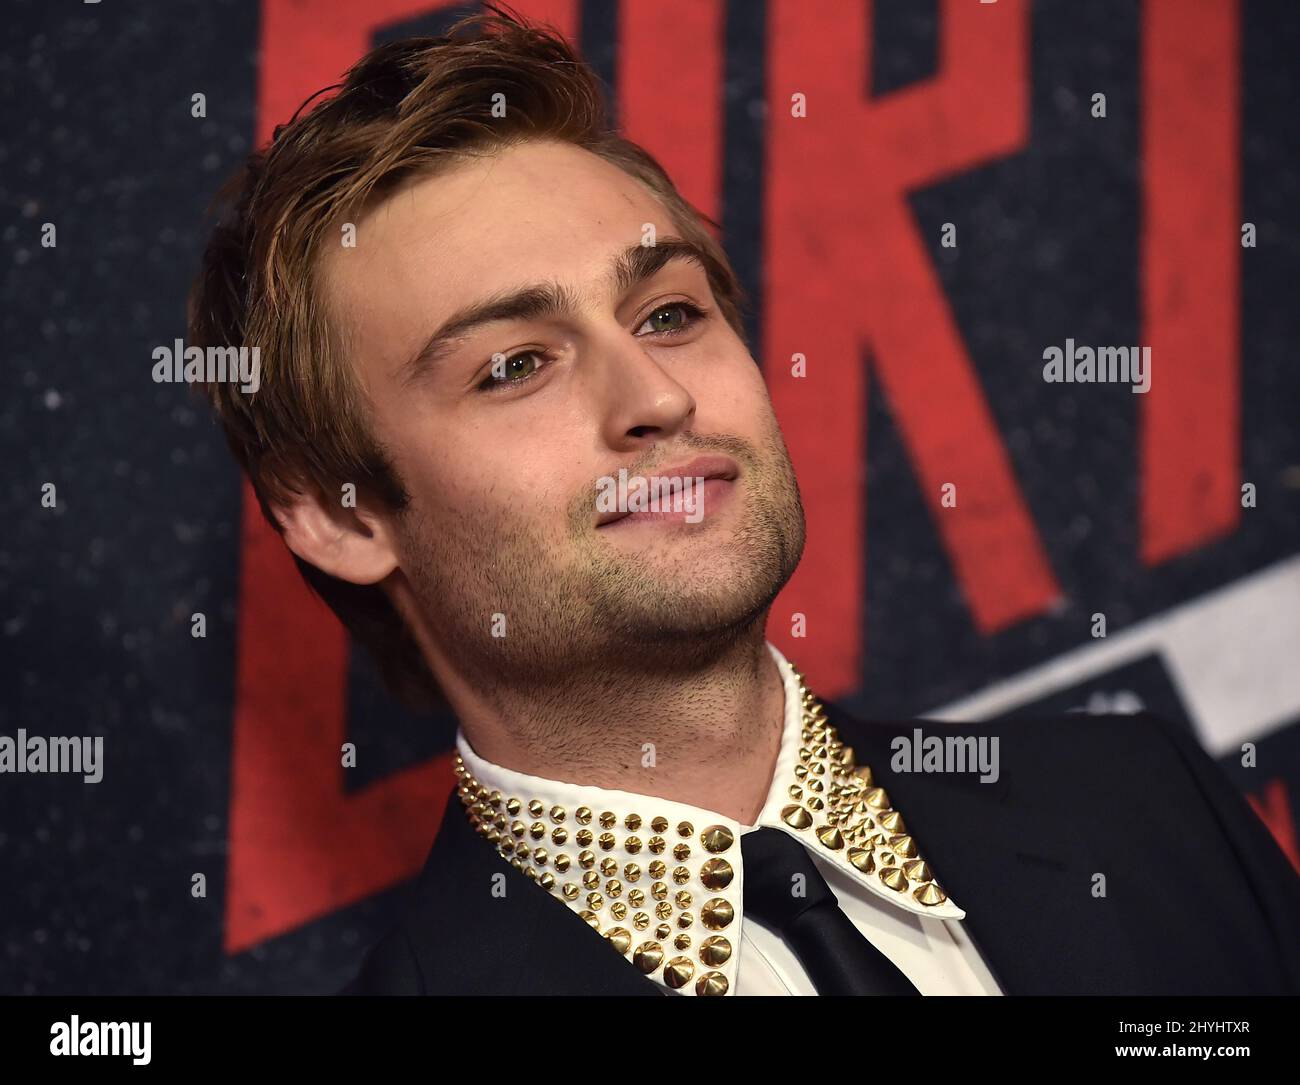 Douglas Booth at Netflix's 'The Dirt' world premiere held at the Arclight Hollywood Cinerama Dome on March 18, 2019 in Hollywood, CA. Stock Photo